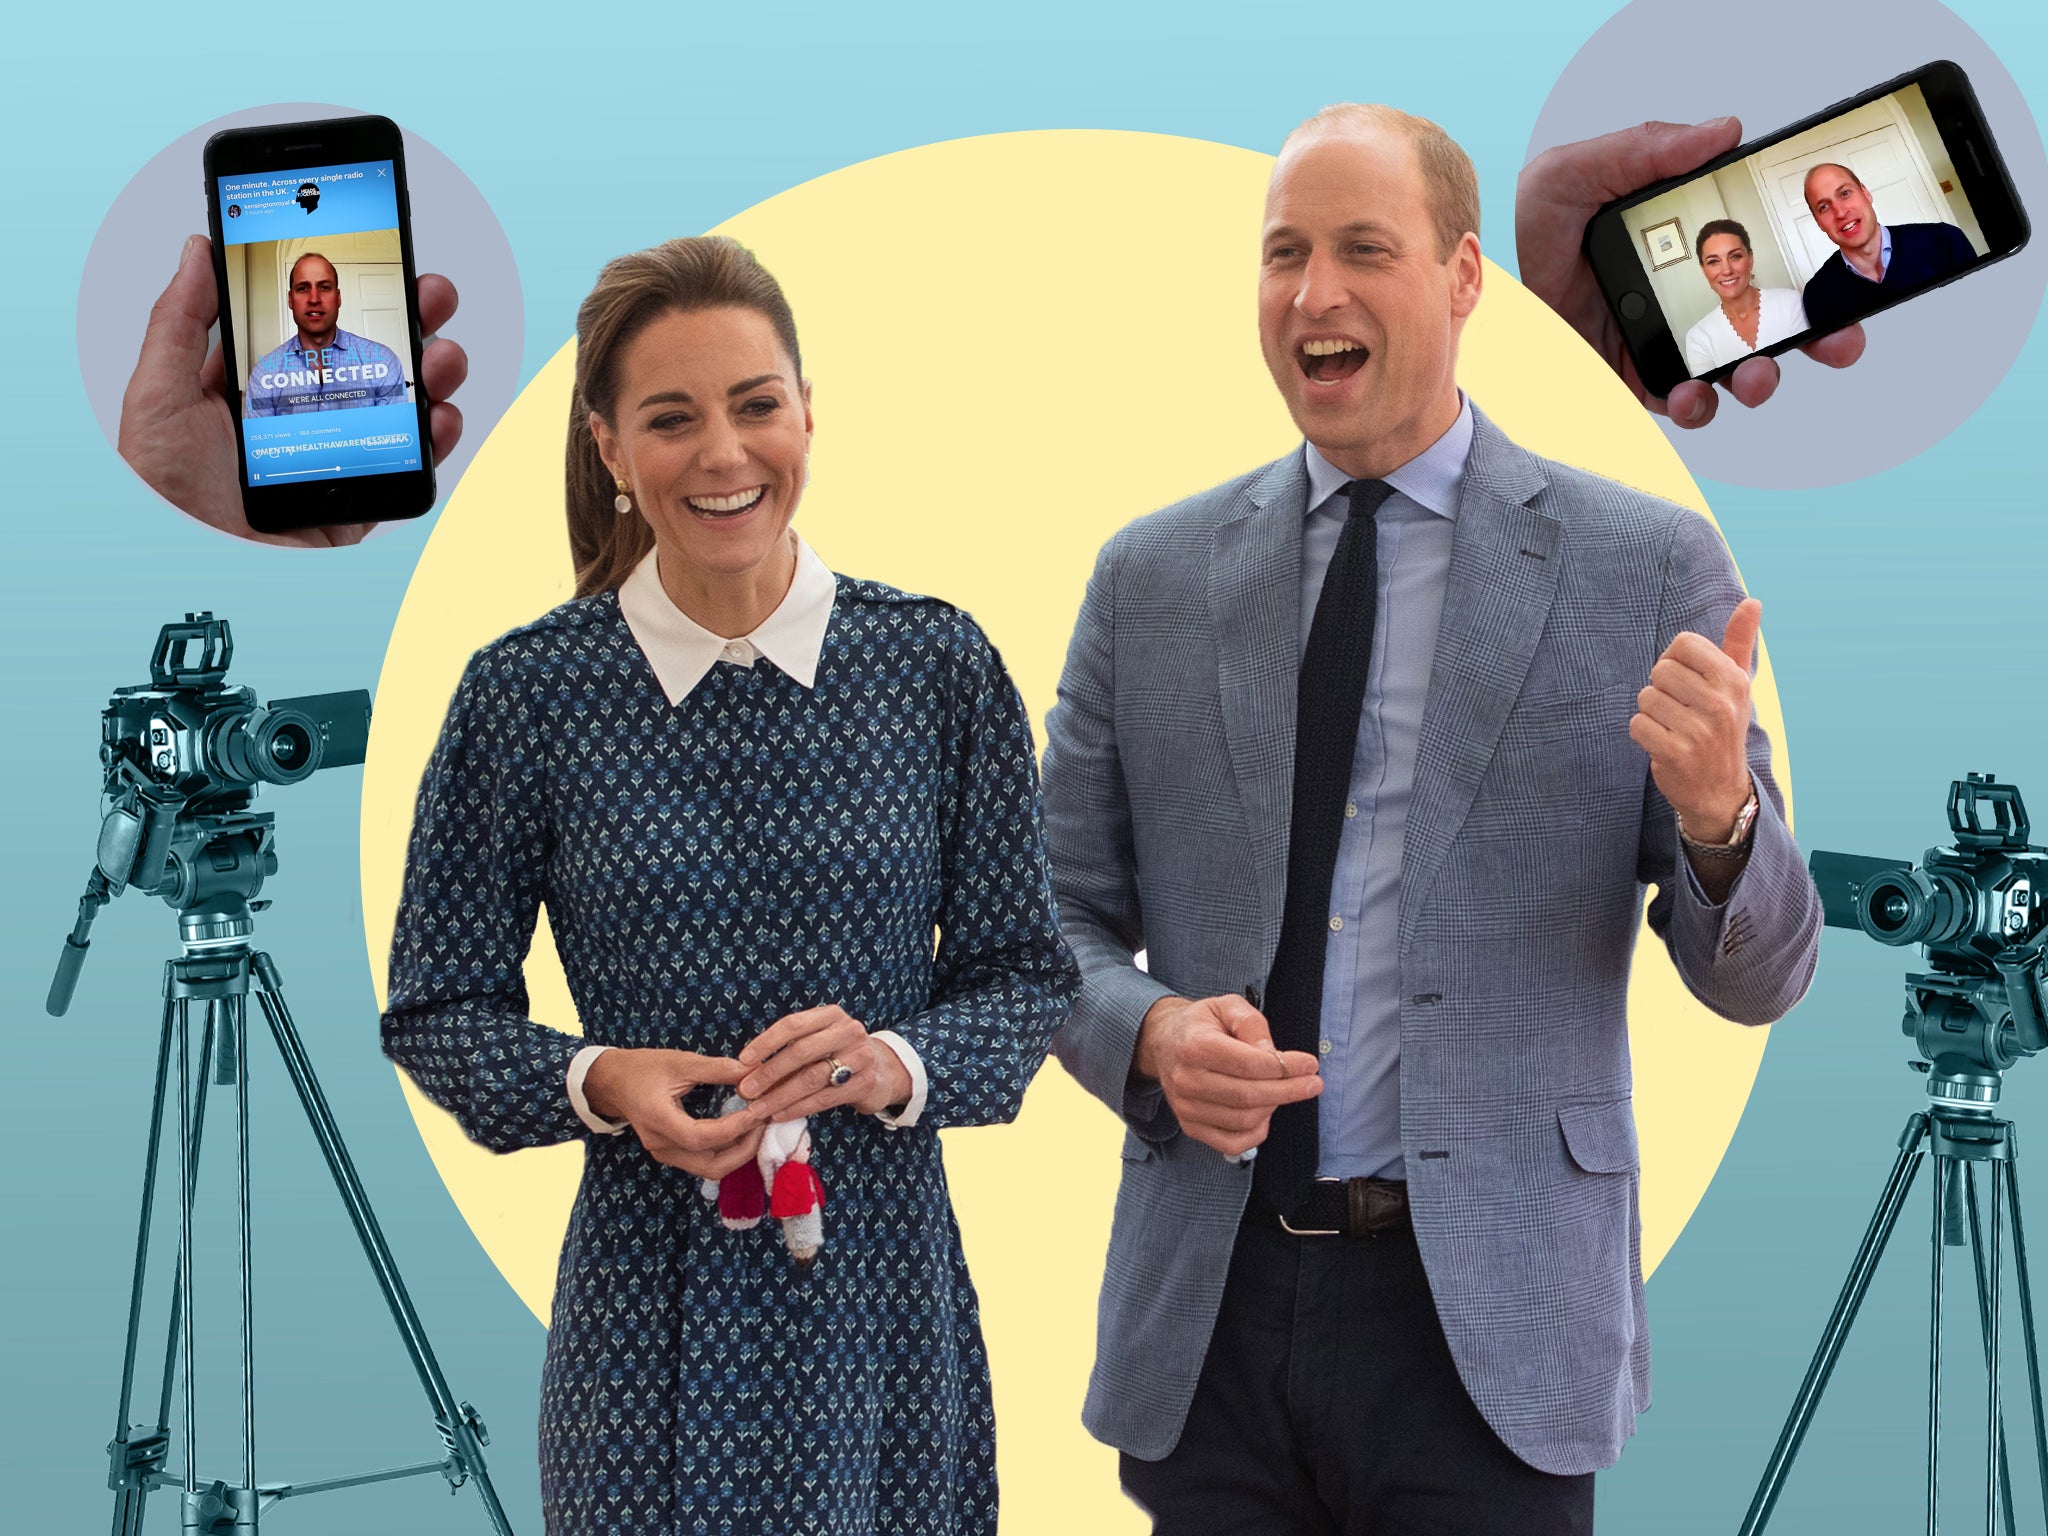 Watch the throne: William and Kate embrace the social media age